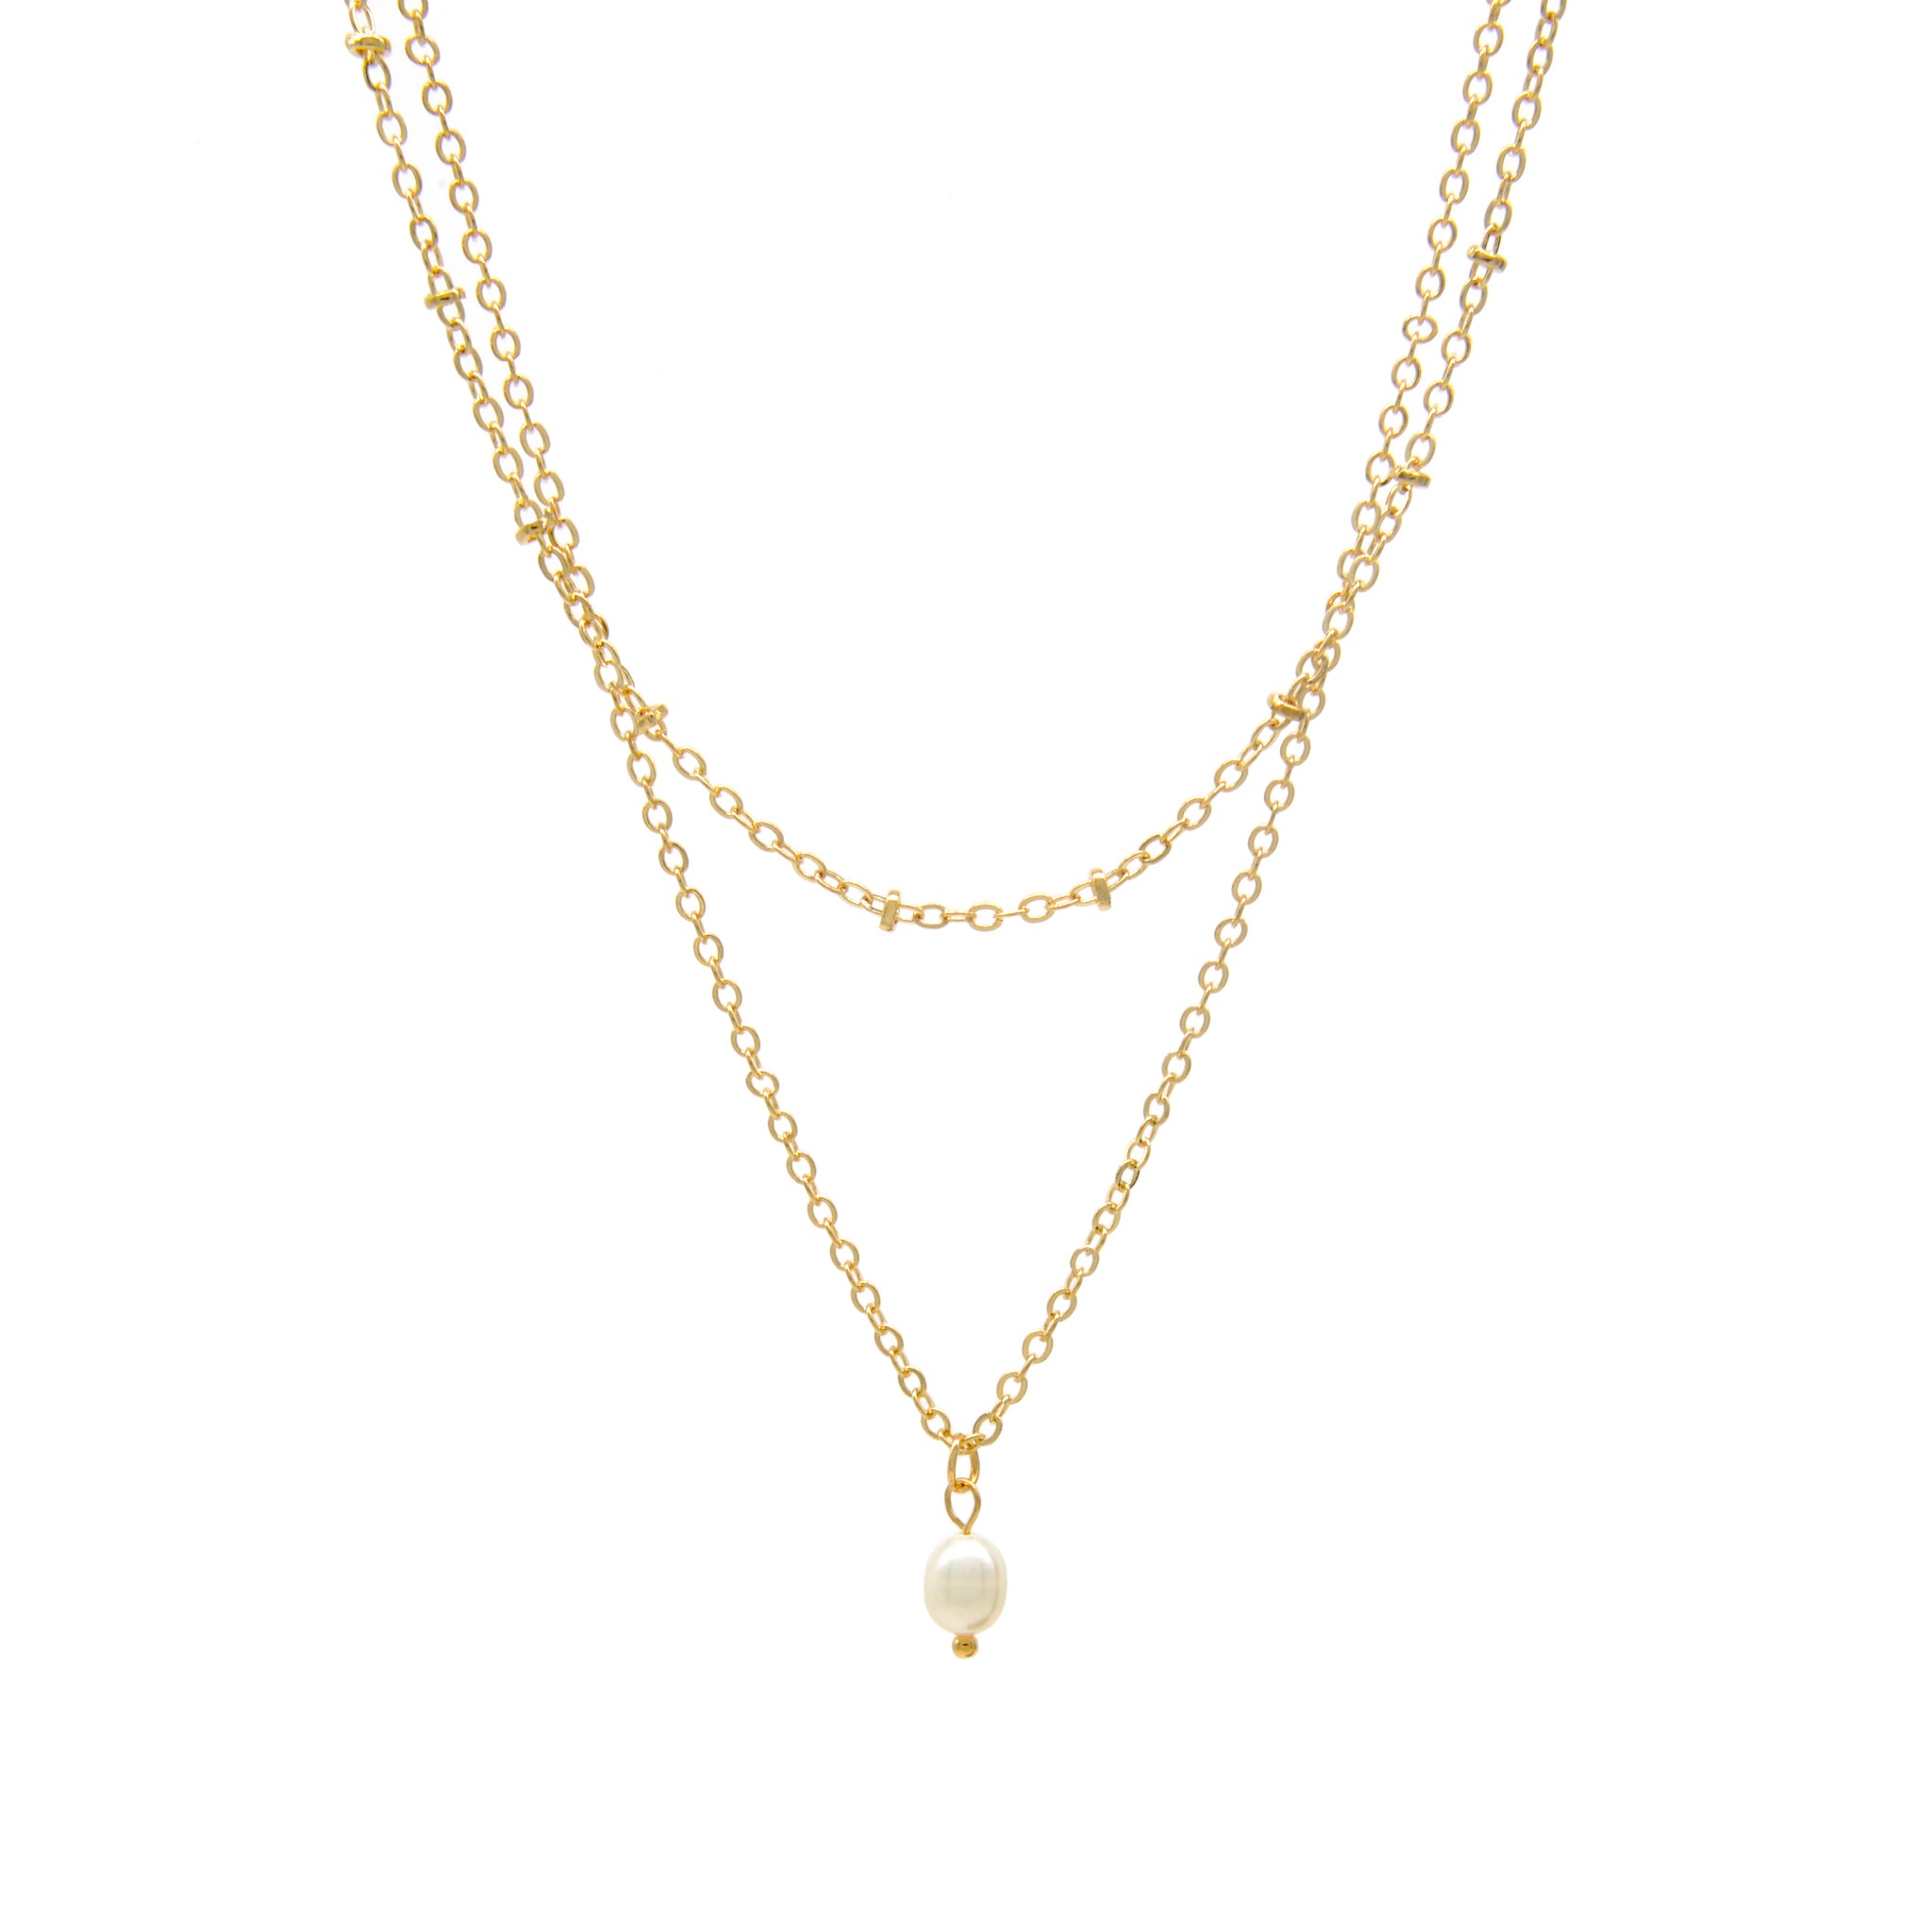 CHANEL Crystal Double Chain CC Necklace Gold 192621